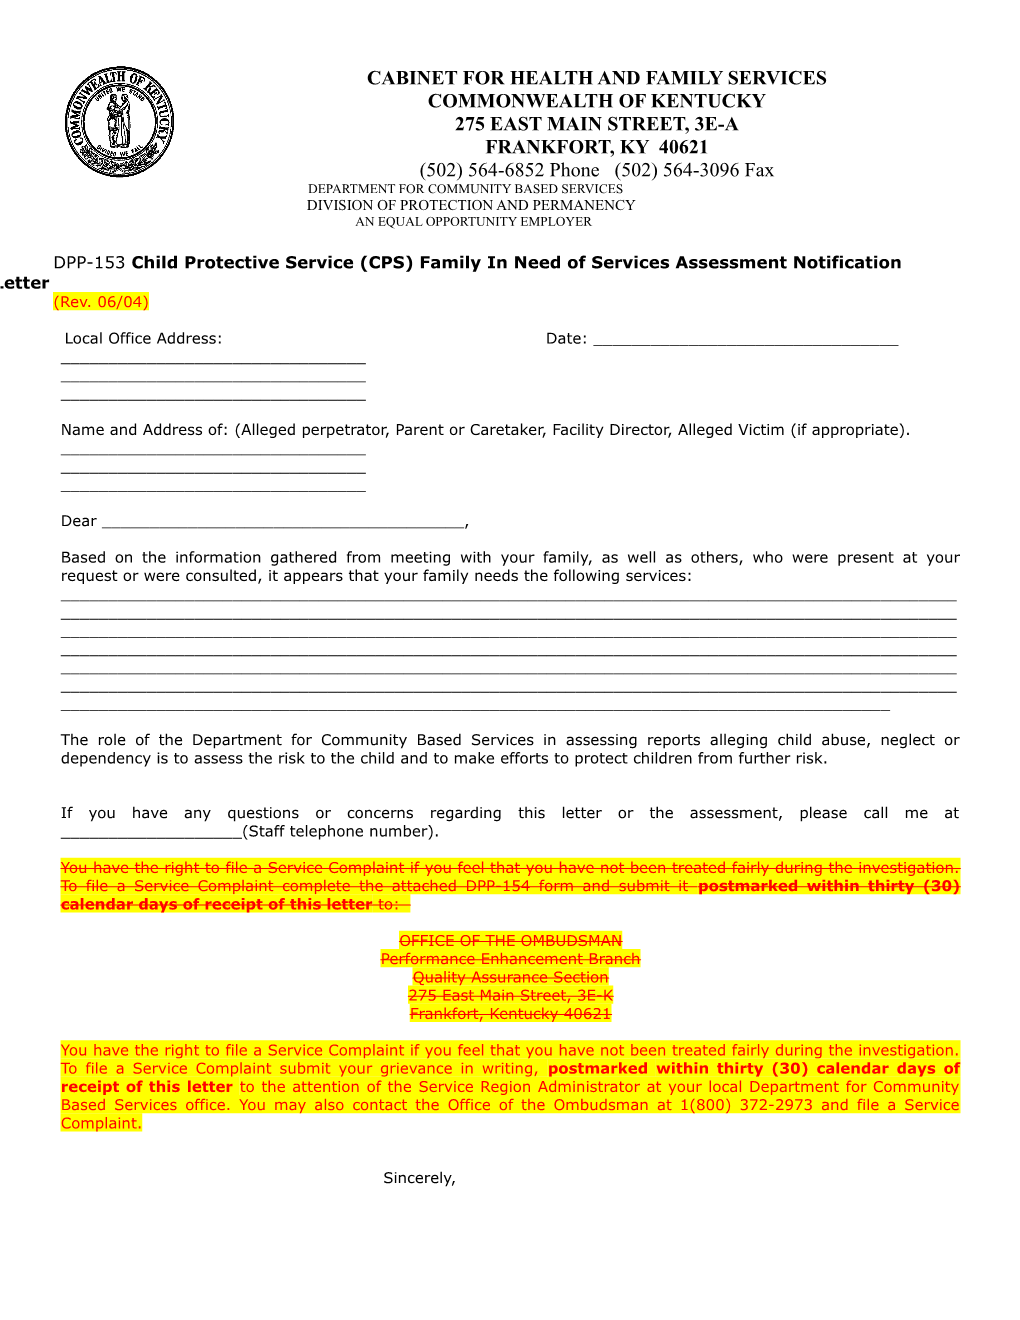 DPP-153 Child Protective Service (CPS) Family in Need of Services Assessment Notification